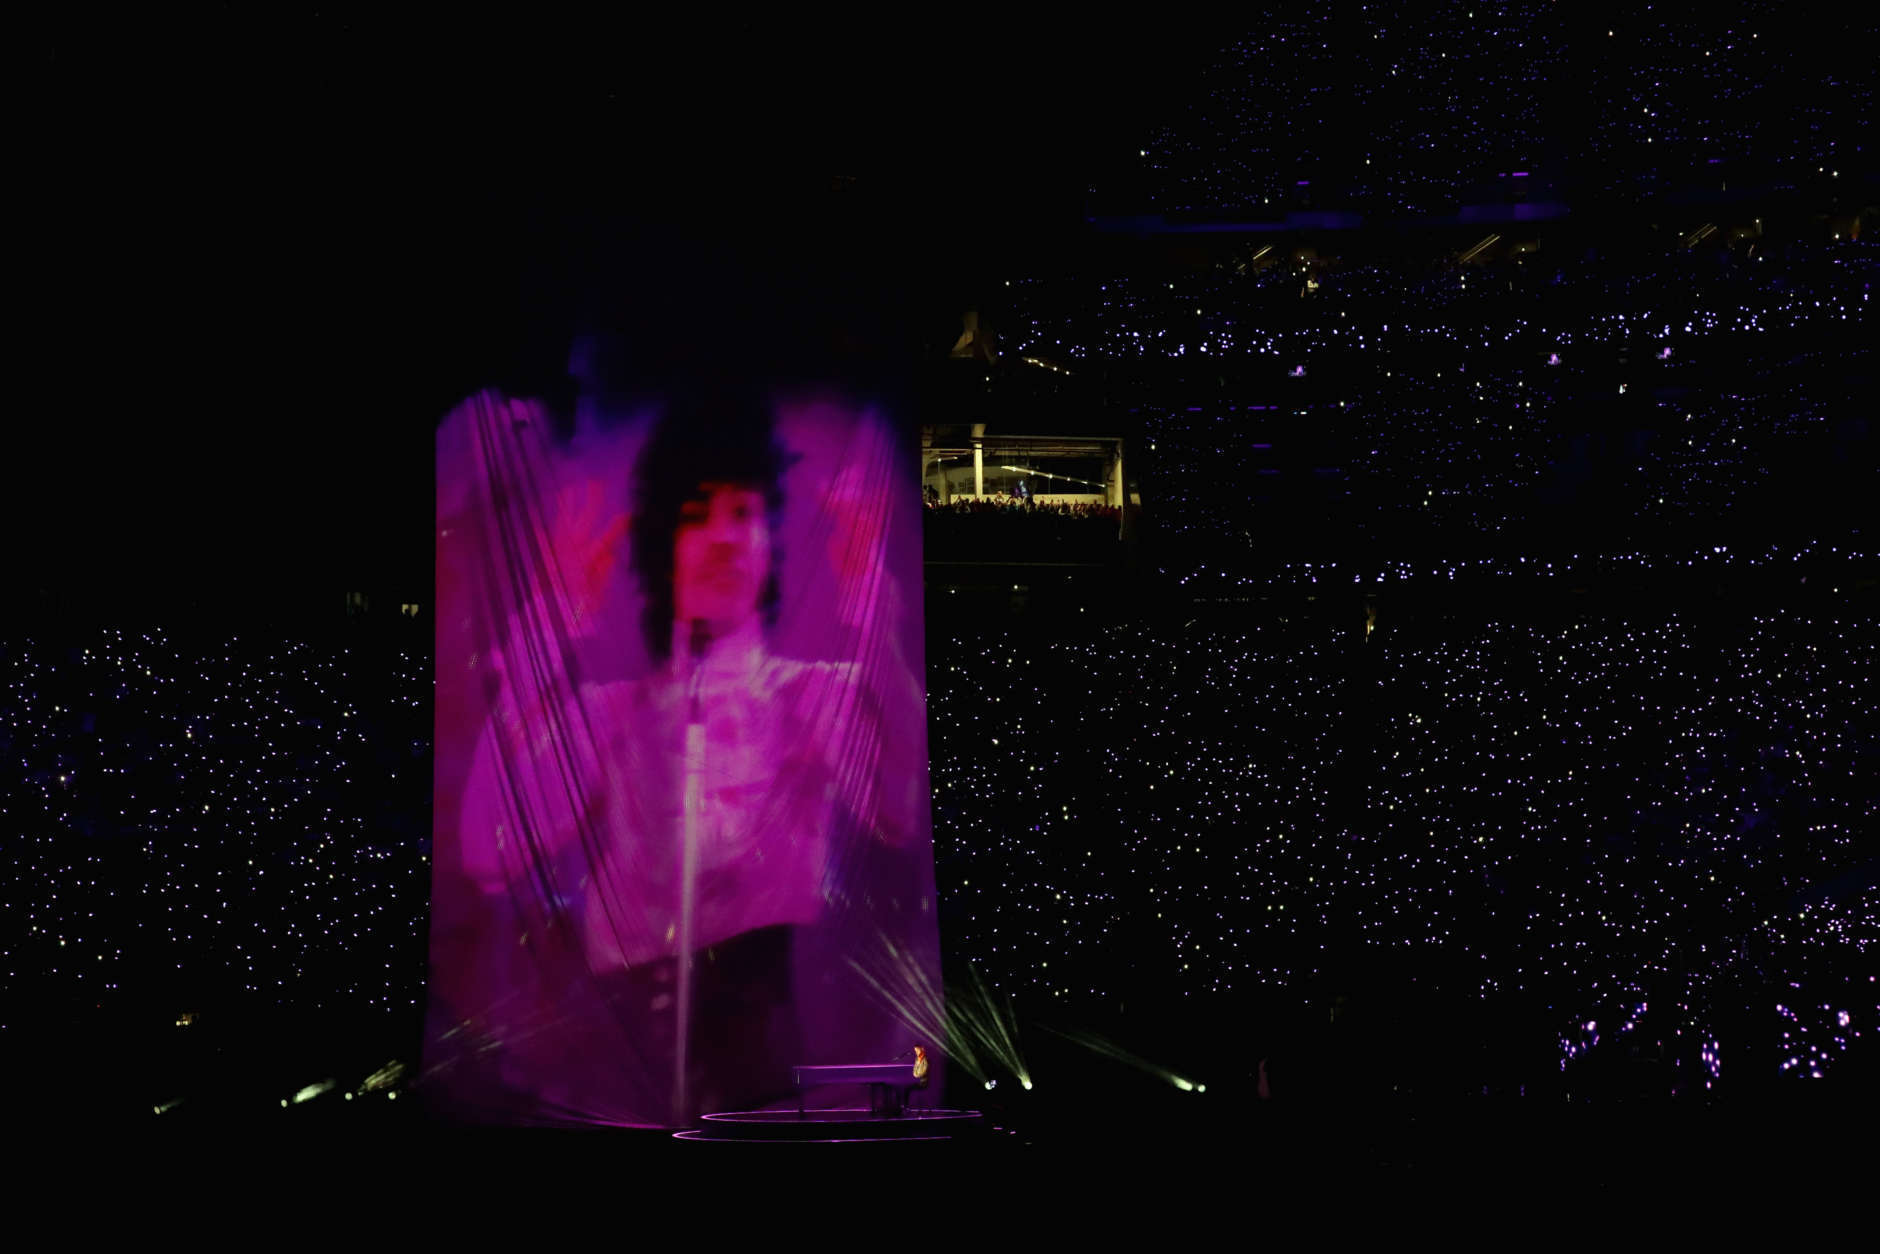 MINNEAPOLIS, MN - FEBRUARY 04: A projection of Prince is shown during the Pepsi Super Bowl LII Halftime Show at U.S. Bank Stadium on February 4, 2018 in Minneapolis, Minnesota.  (Photo by Streeter Lecka/Getty Images)